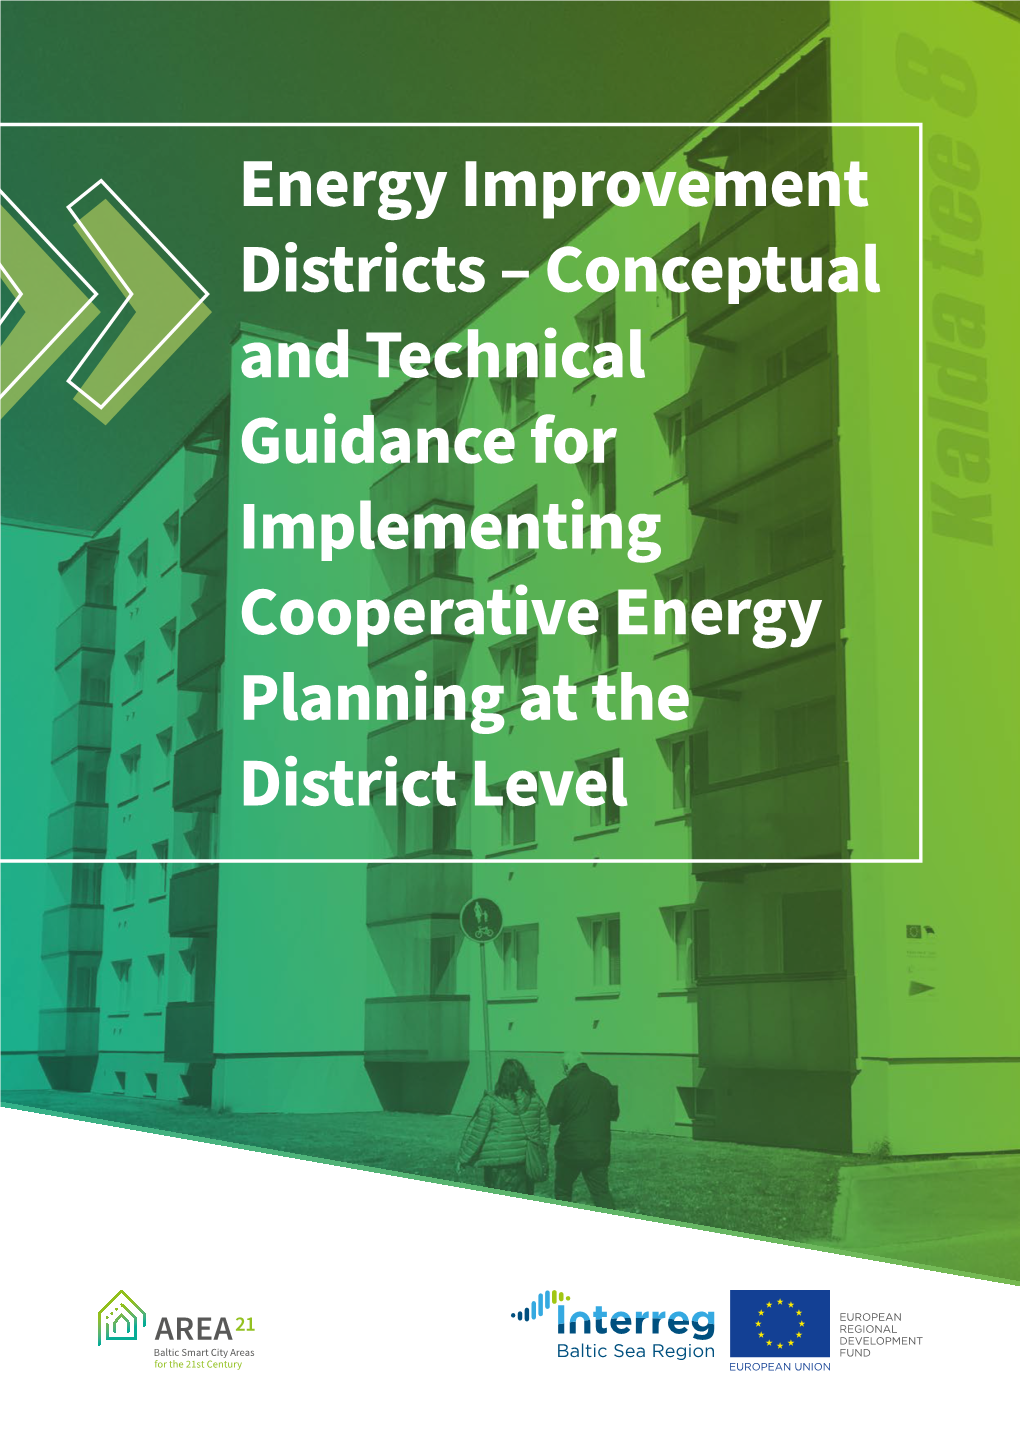 Energy Improvement Districts – Conceptual and Technical Guidance for Implementing Cooperative Energy Planning at the District Level AREA 21 Project Partners